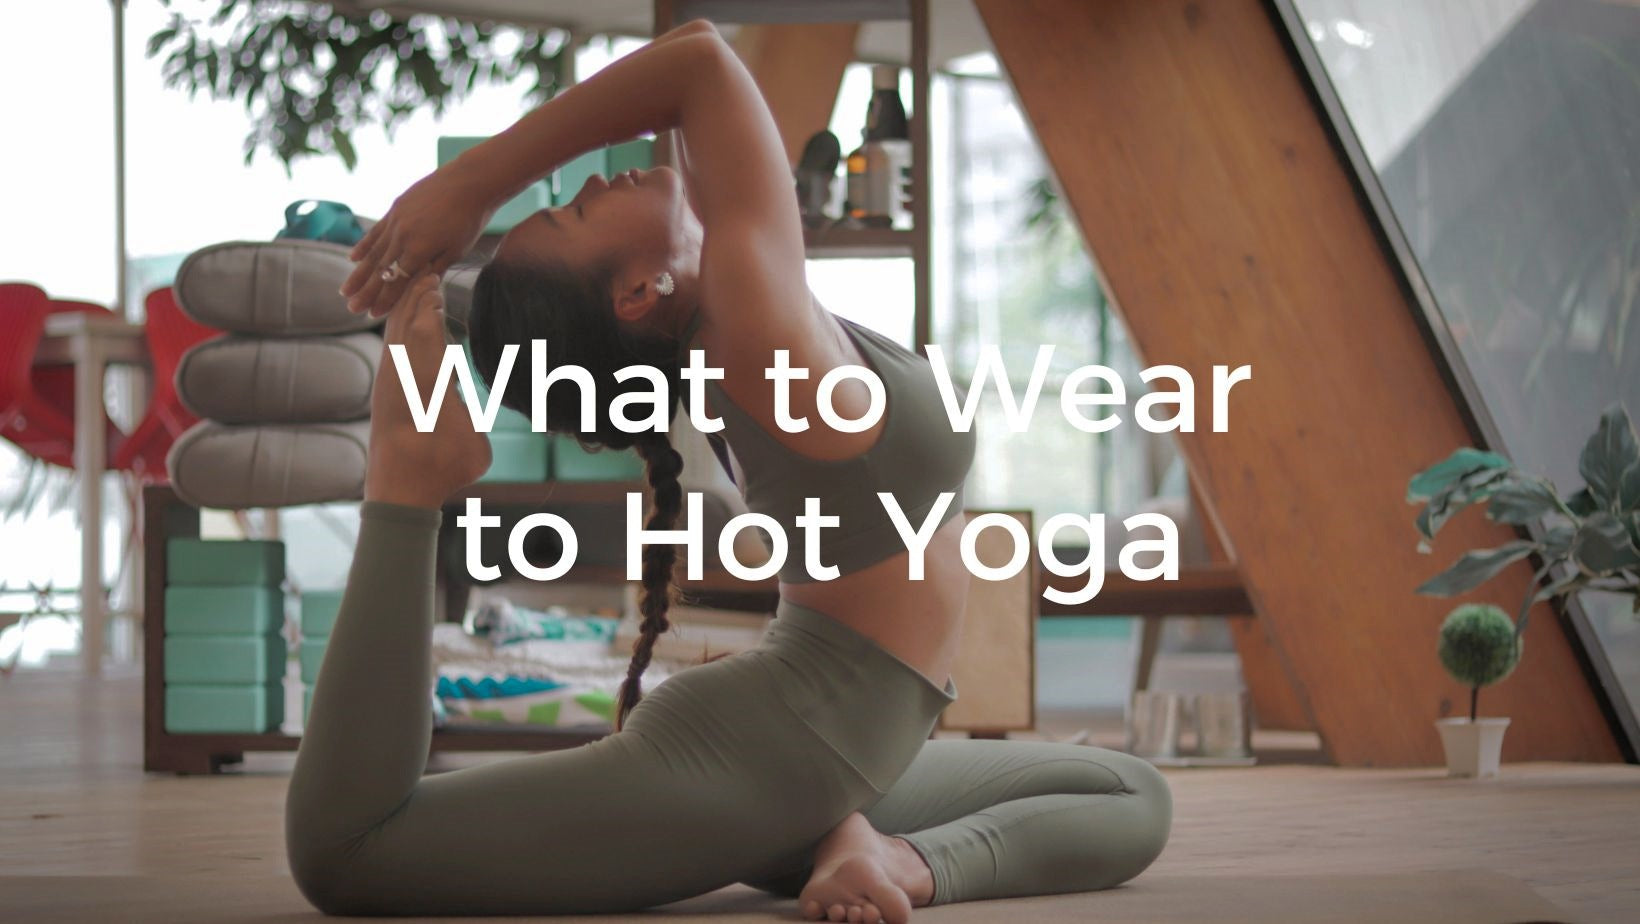 Here's Exactly What to Wear to Hot Yoga  Hot yoga outfit, Hot yoga, Bra outfit  fashion